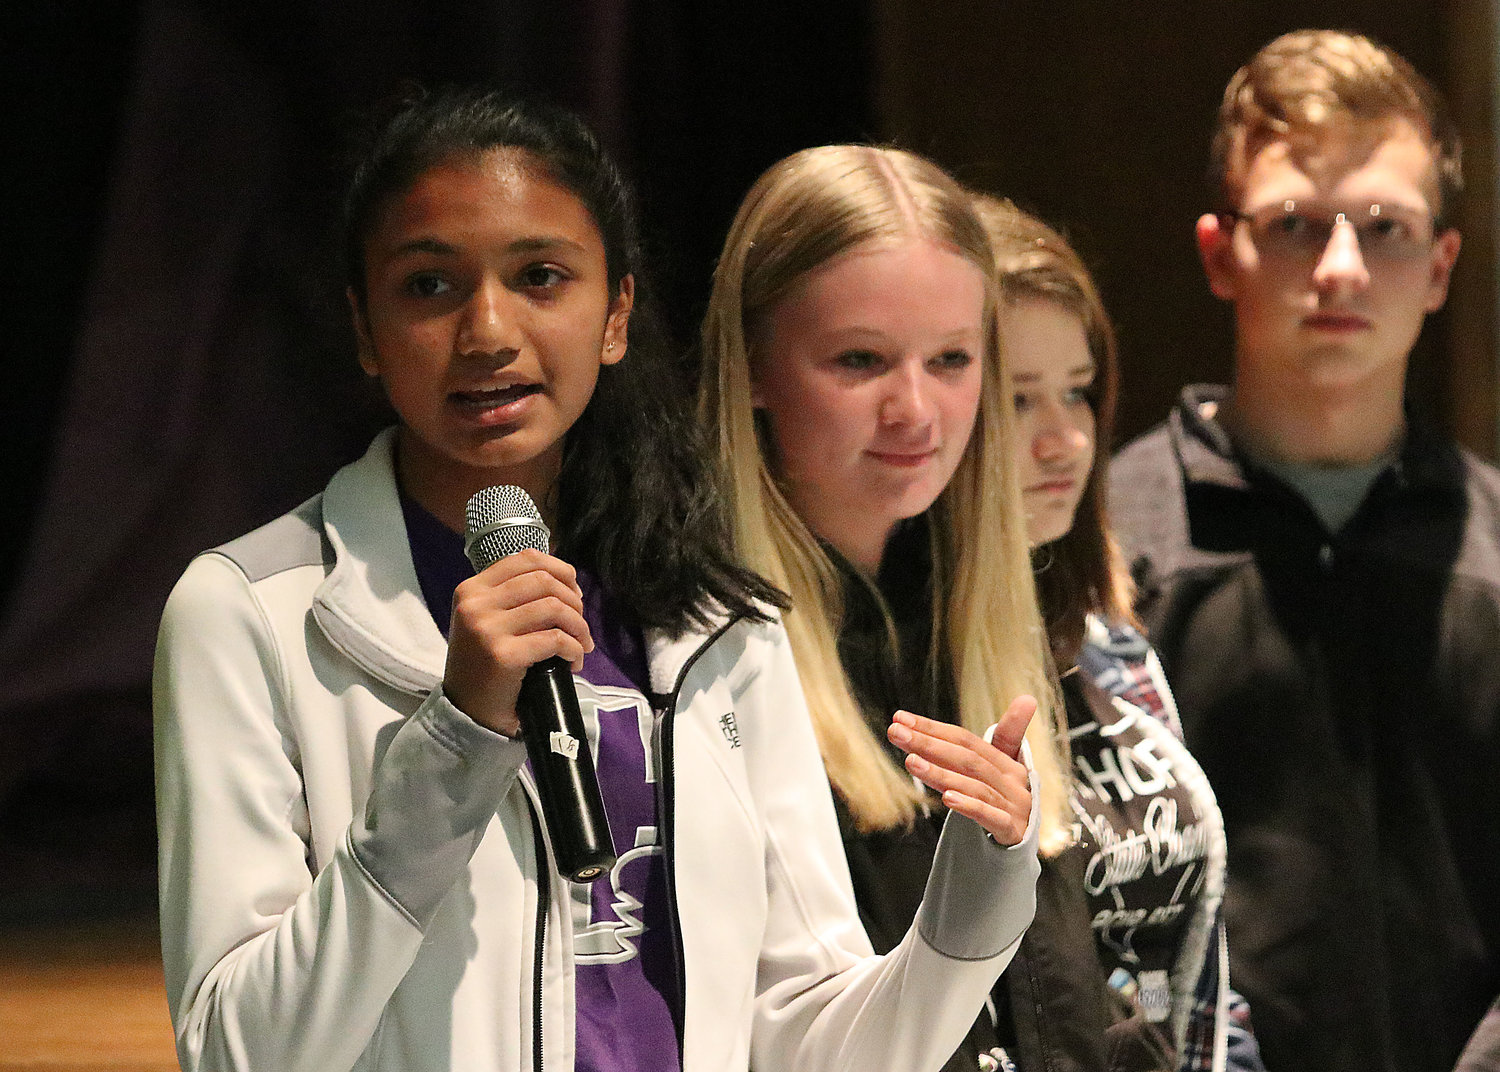 Sophomore Aditi Mehta speaks about Mt. Hope High School, while fellow students, Kristiana Cabral, Mikayla Ricks and Jacob Perry look on.